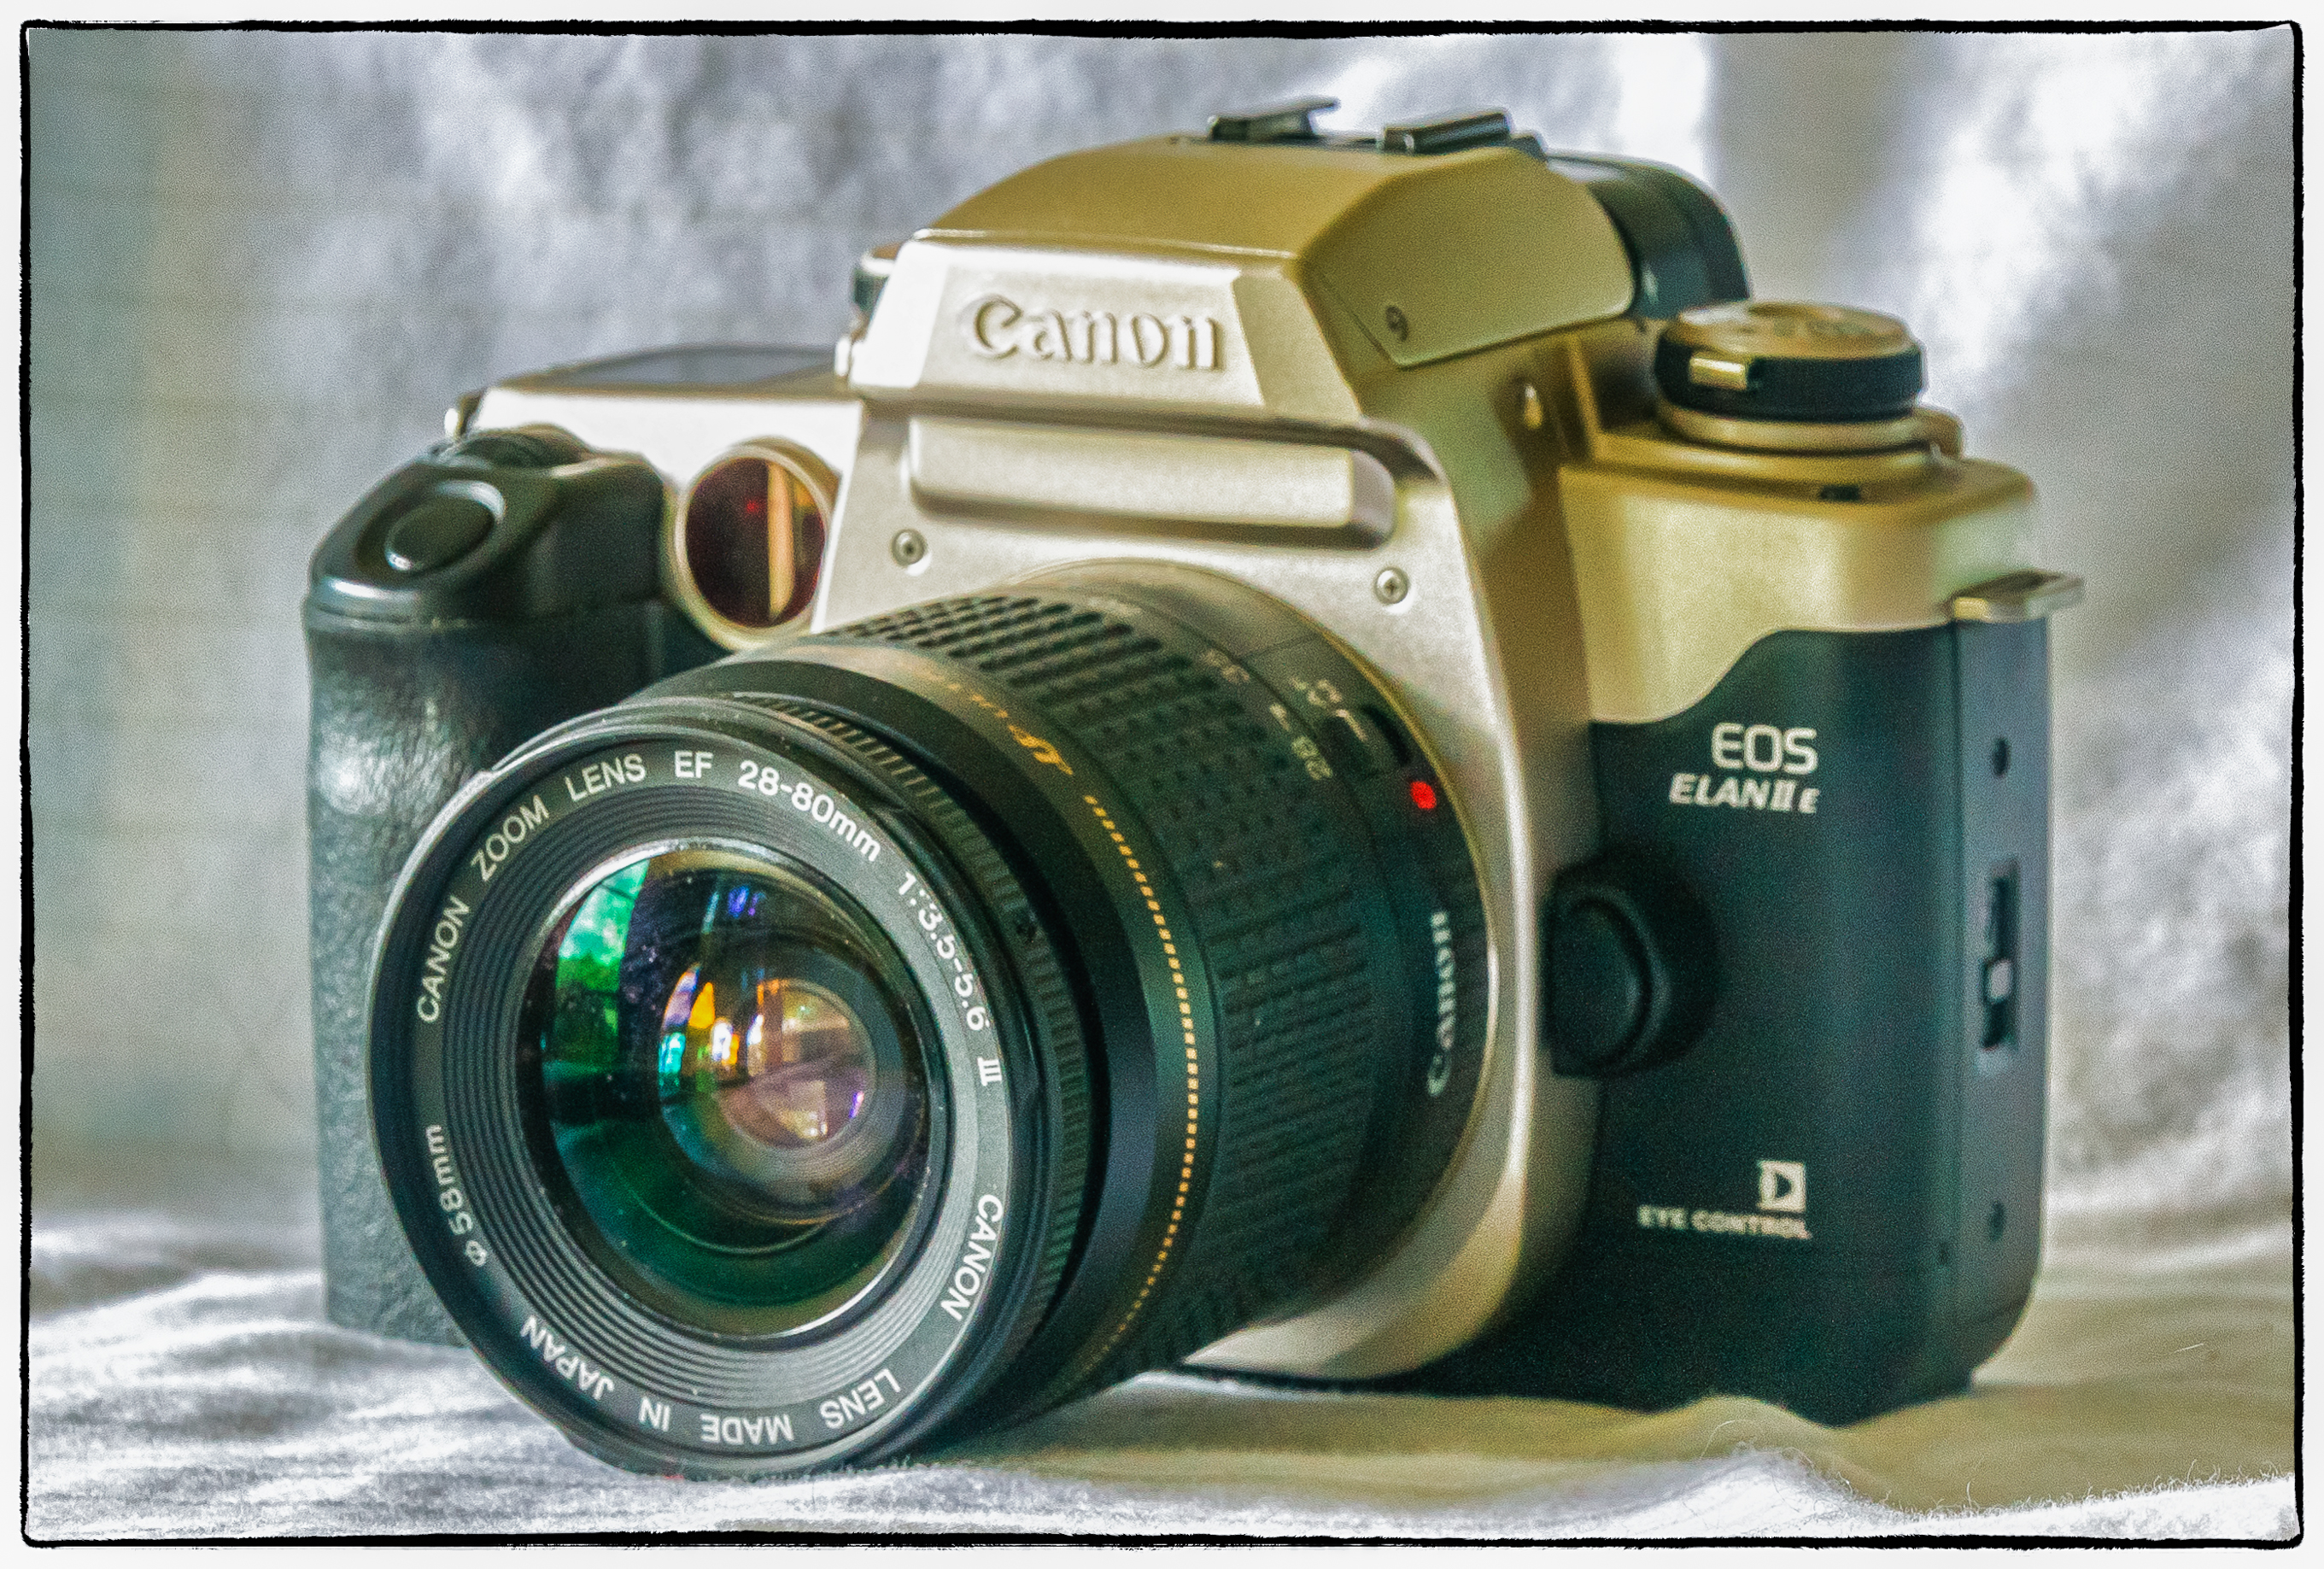 April Film Camera – Canon Eos Elan IIe – Photography, Images and 